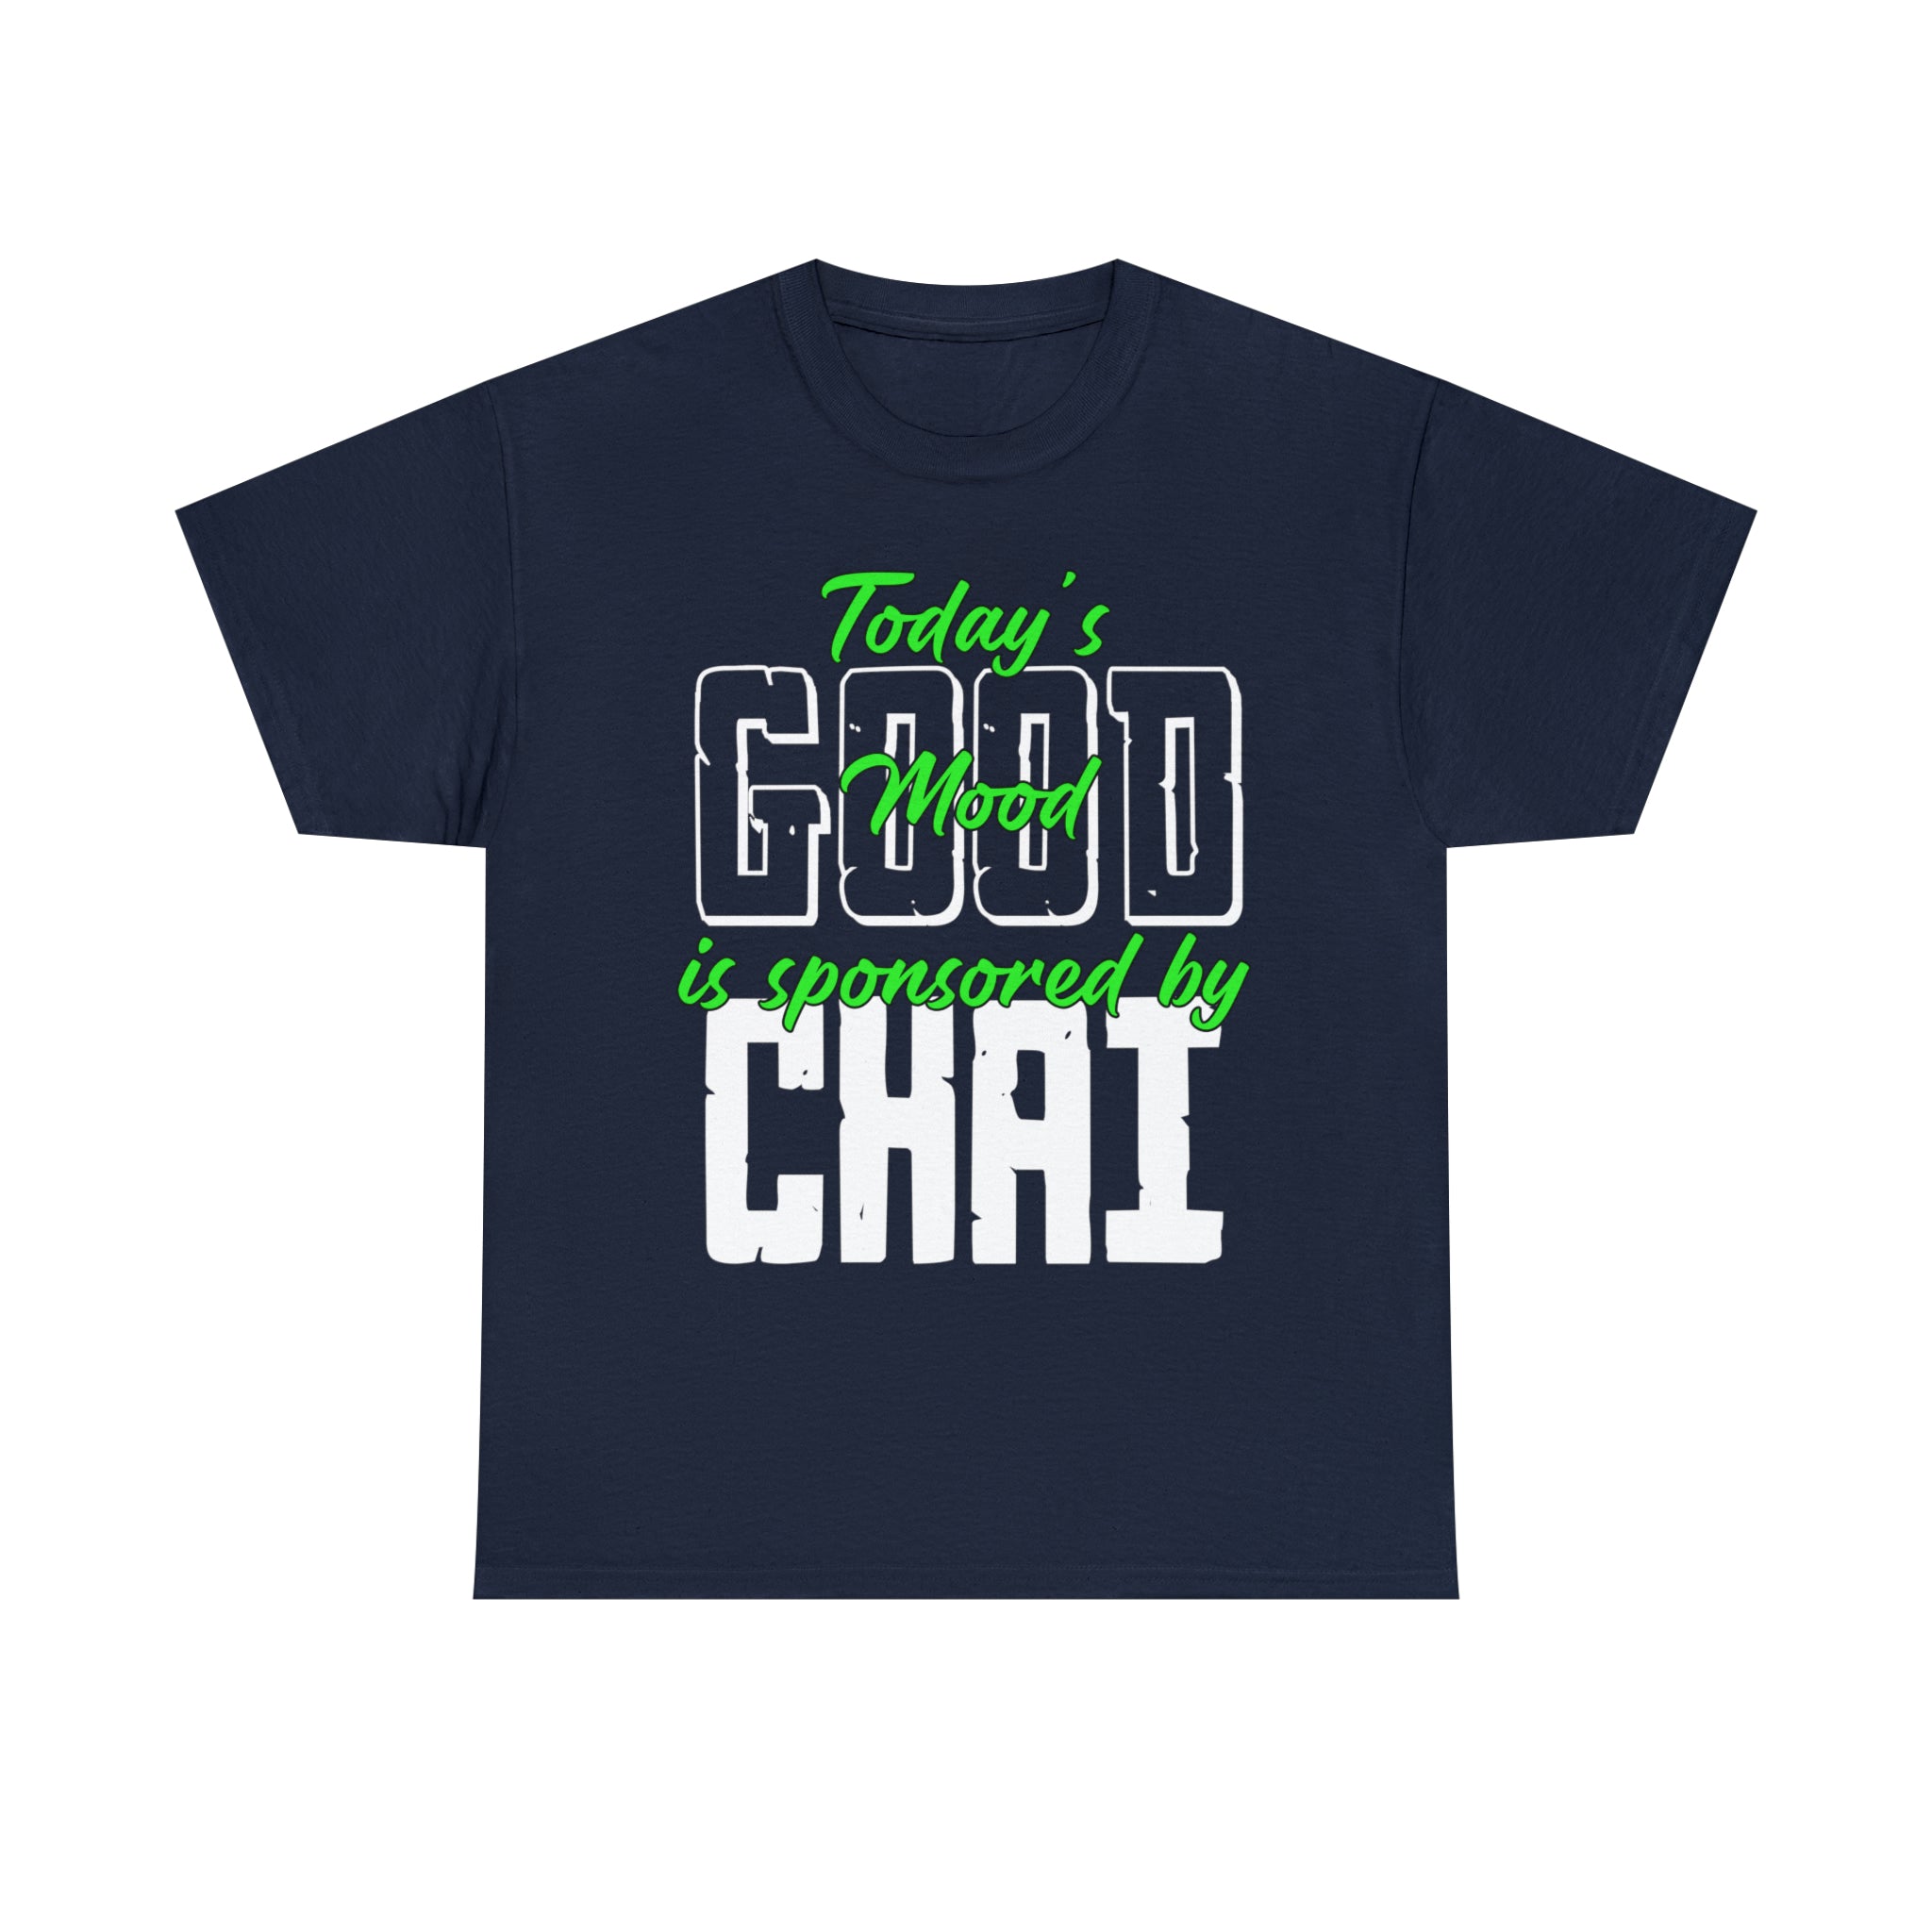 Today's Mood is Sponsored by Good Chai T-Shirt Designs by C&C